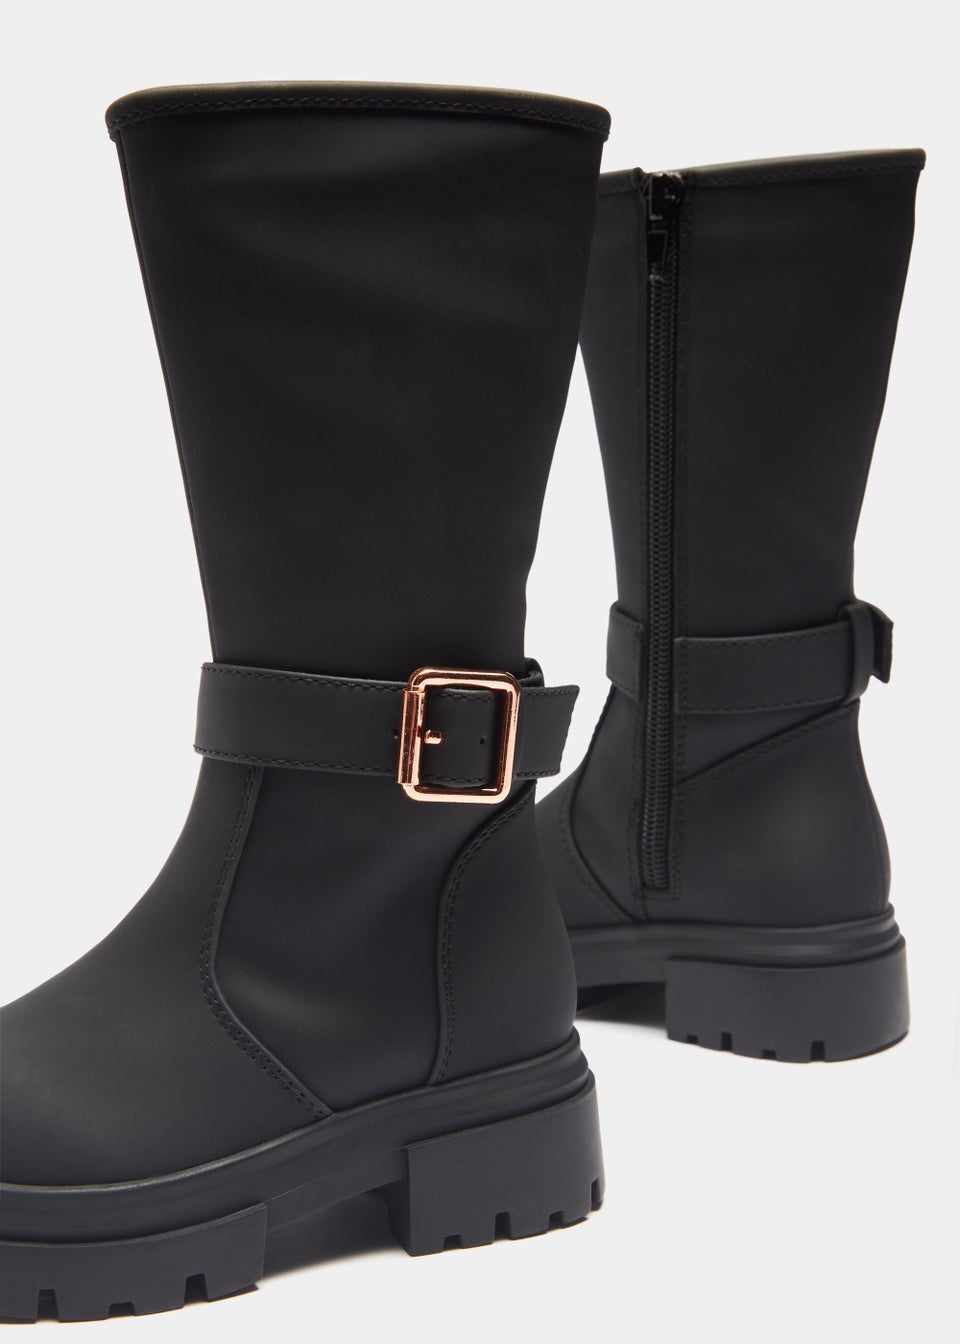 Girls Black Buckle Knee High Boots (Younger 4-12)